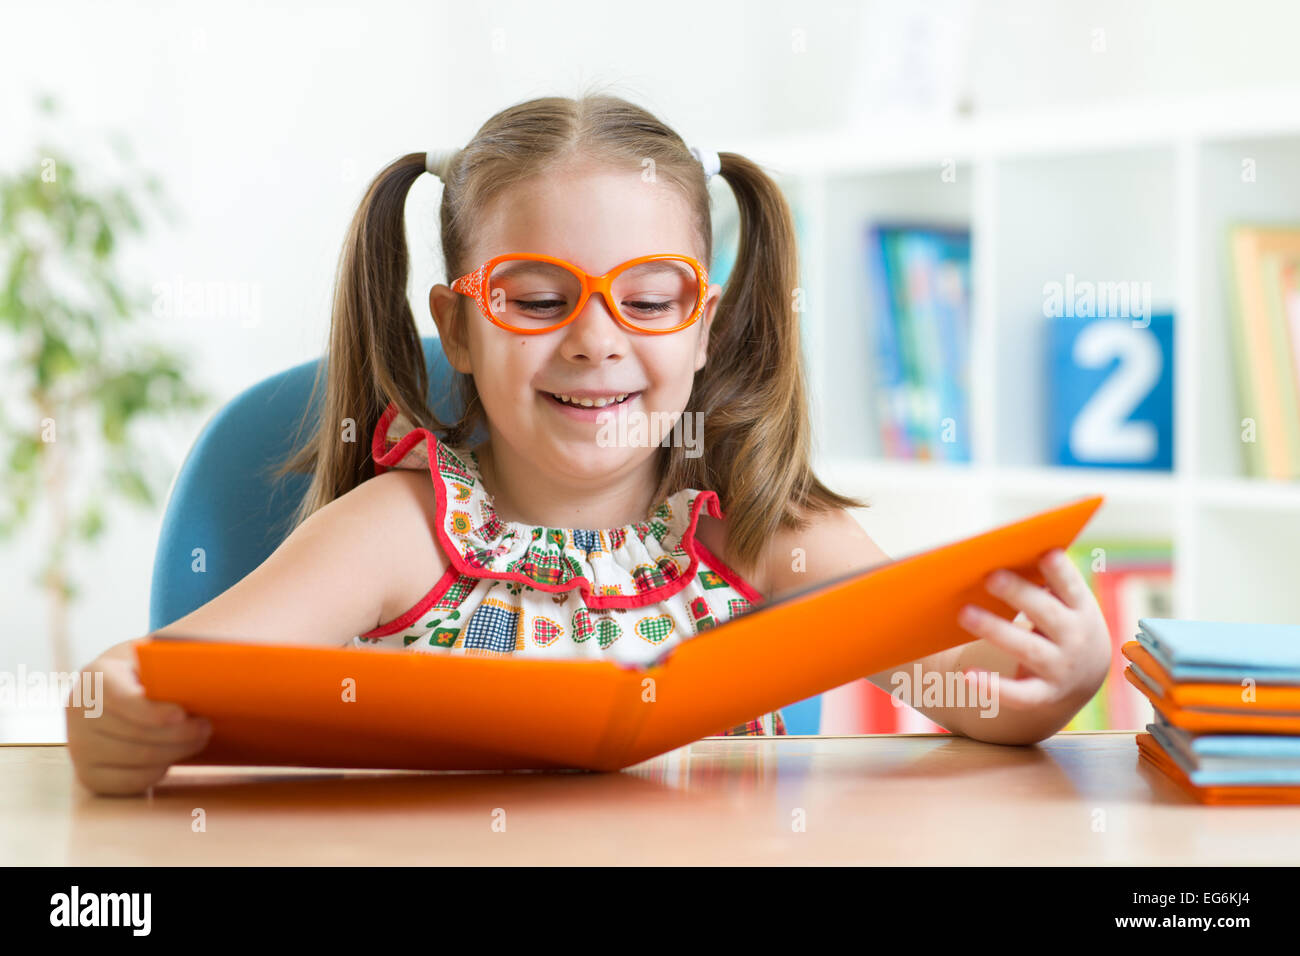 Happy funny child girl in glasses reading a book Stock Photo